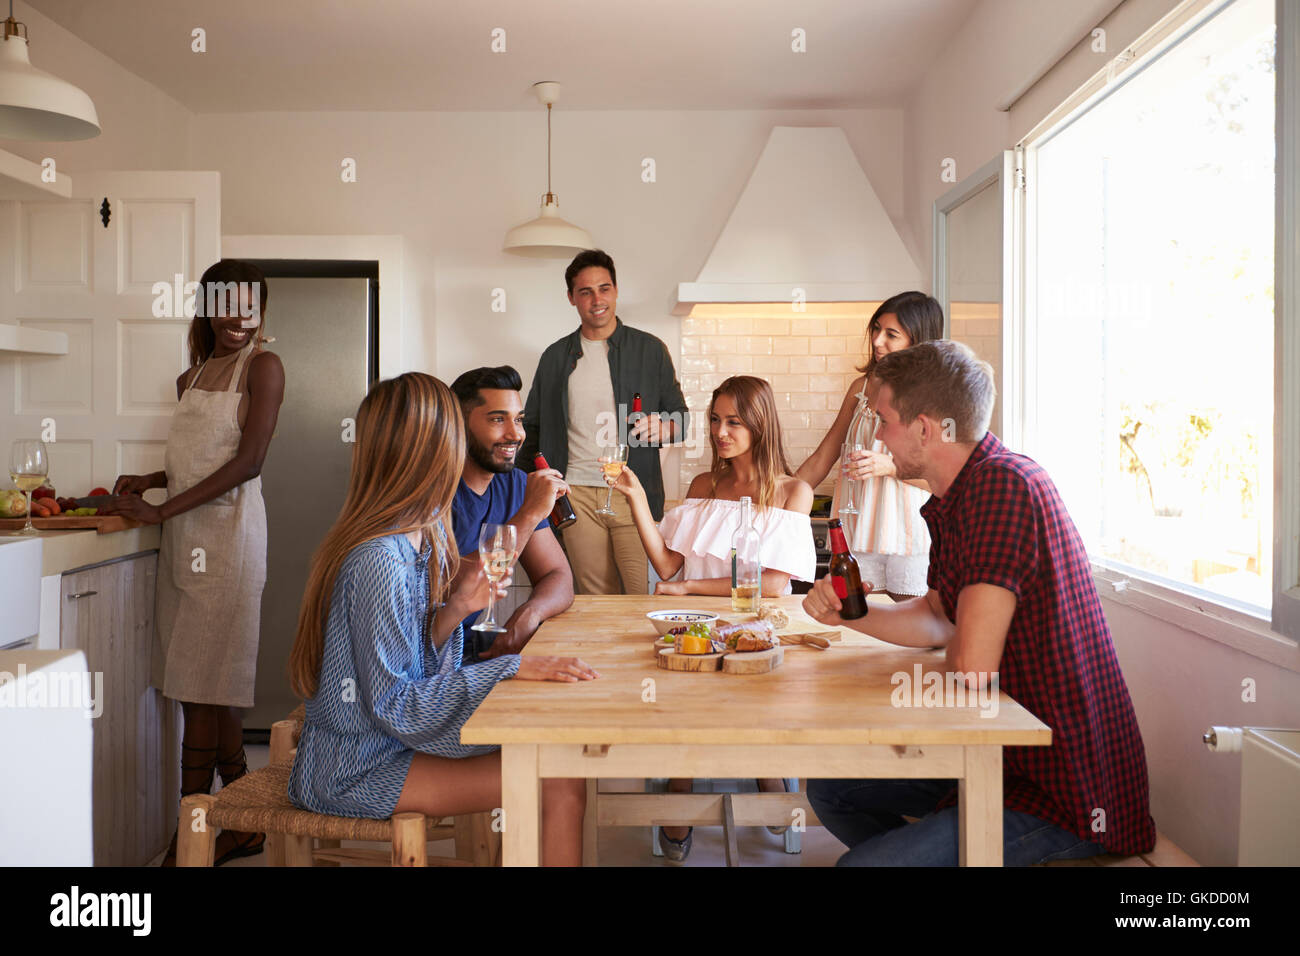 Group of friends talk in kitchen, one preparing food Stock Photo